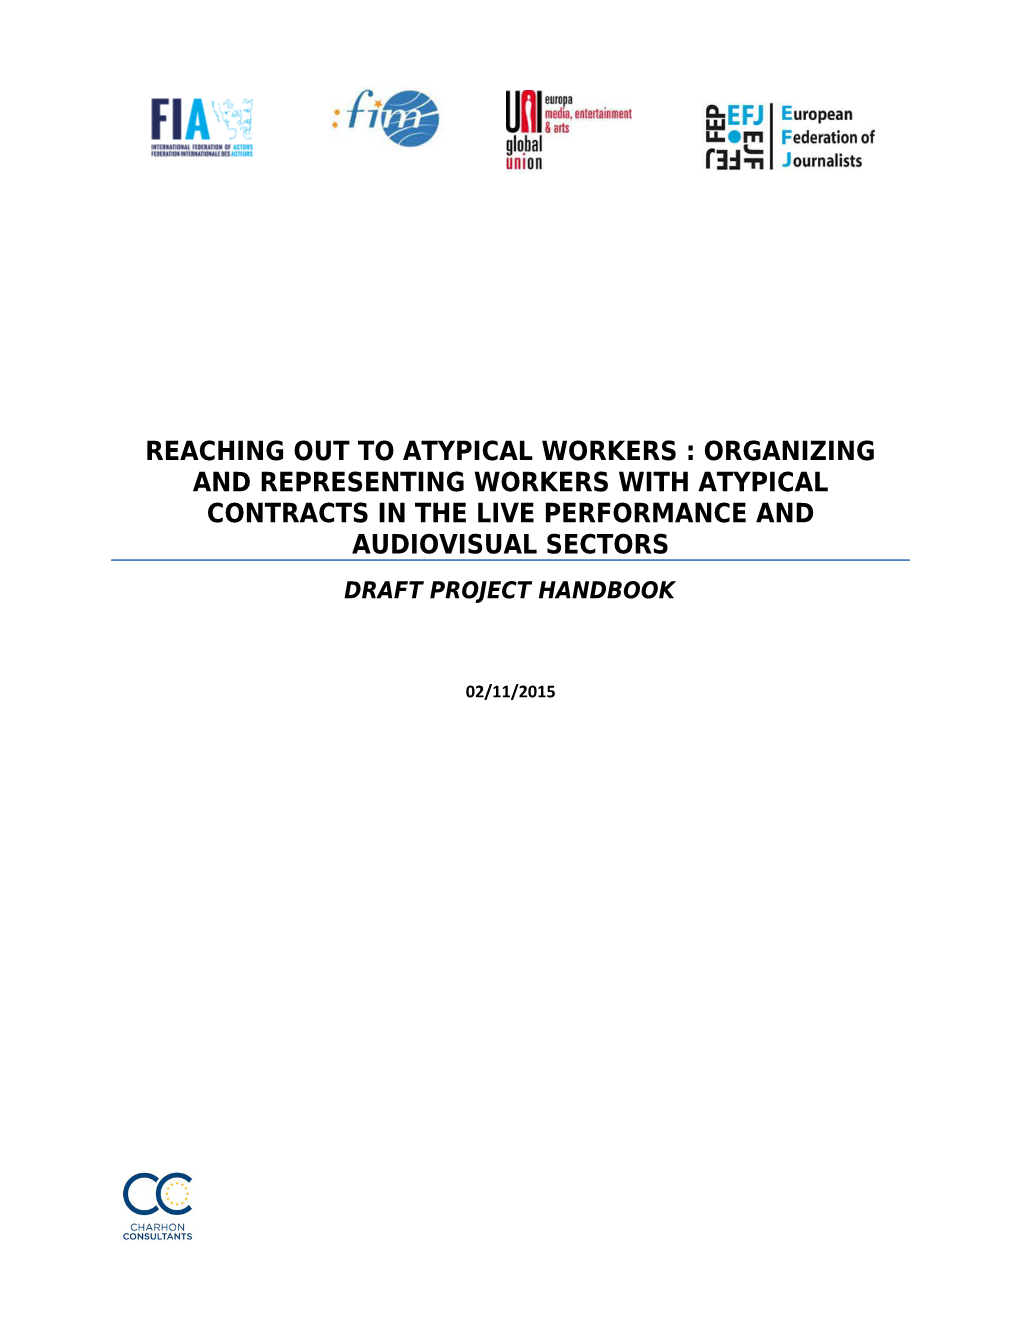 Reaching out to Atypical Workers : Organizing and Representing Workers with Atypical Contracts